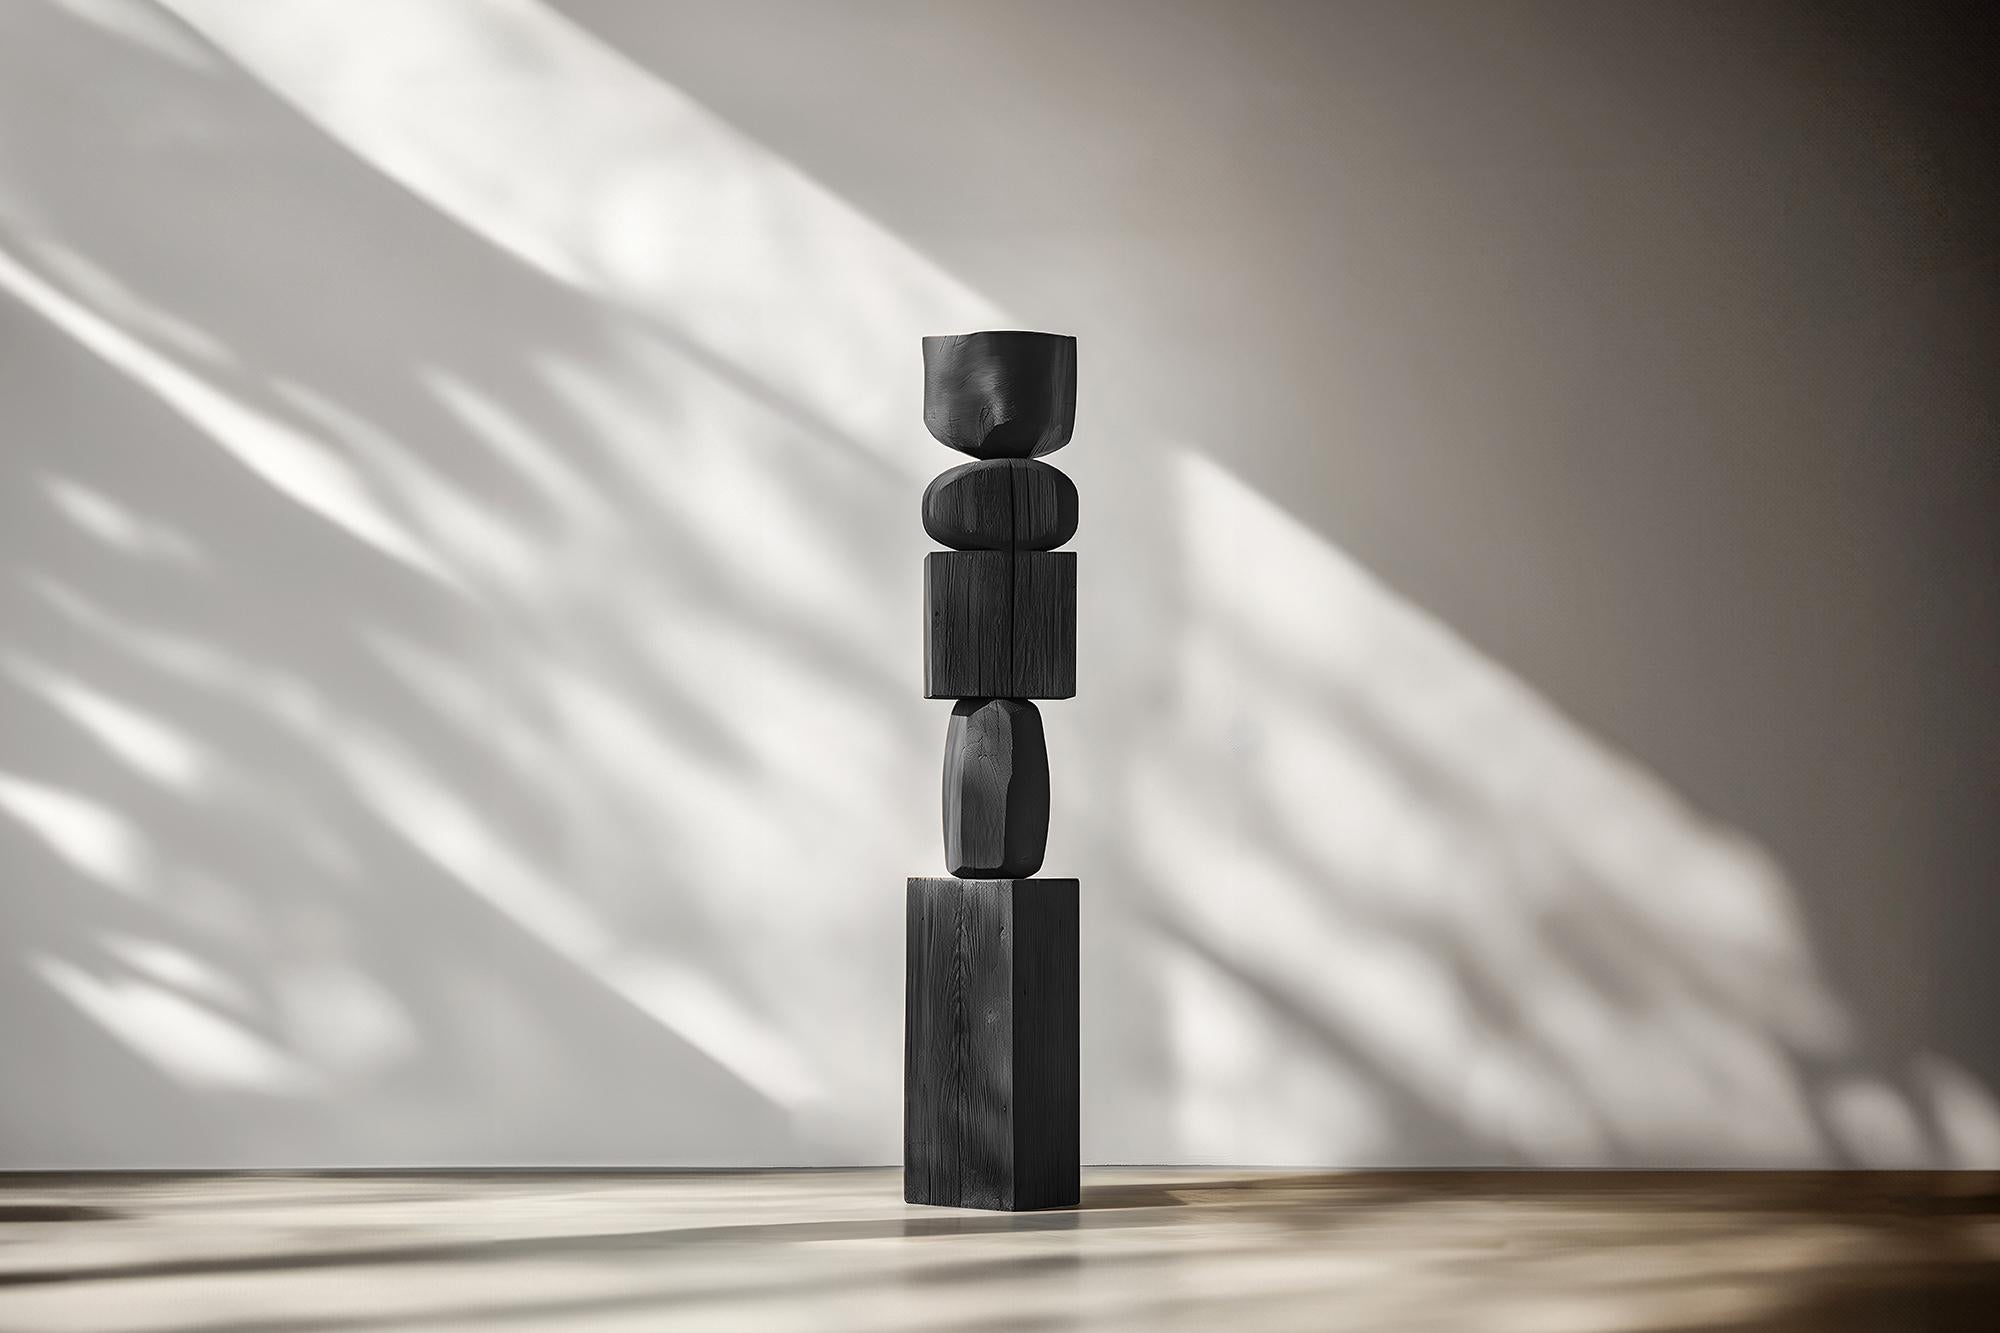 Escalona's Black Solid Wood Sculpture of Abstract Elegance, Still Stand No85
——

Joel Escalona's wooden standing sculptures are objects of raw beauty and serene grace. Each one is a testament to the power of the material, with smooth curves that